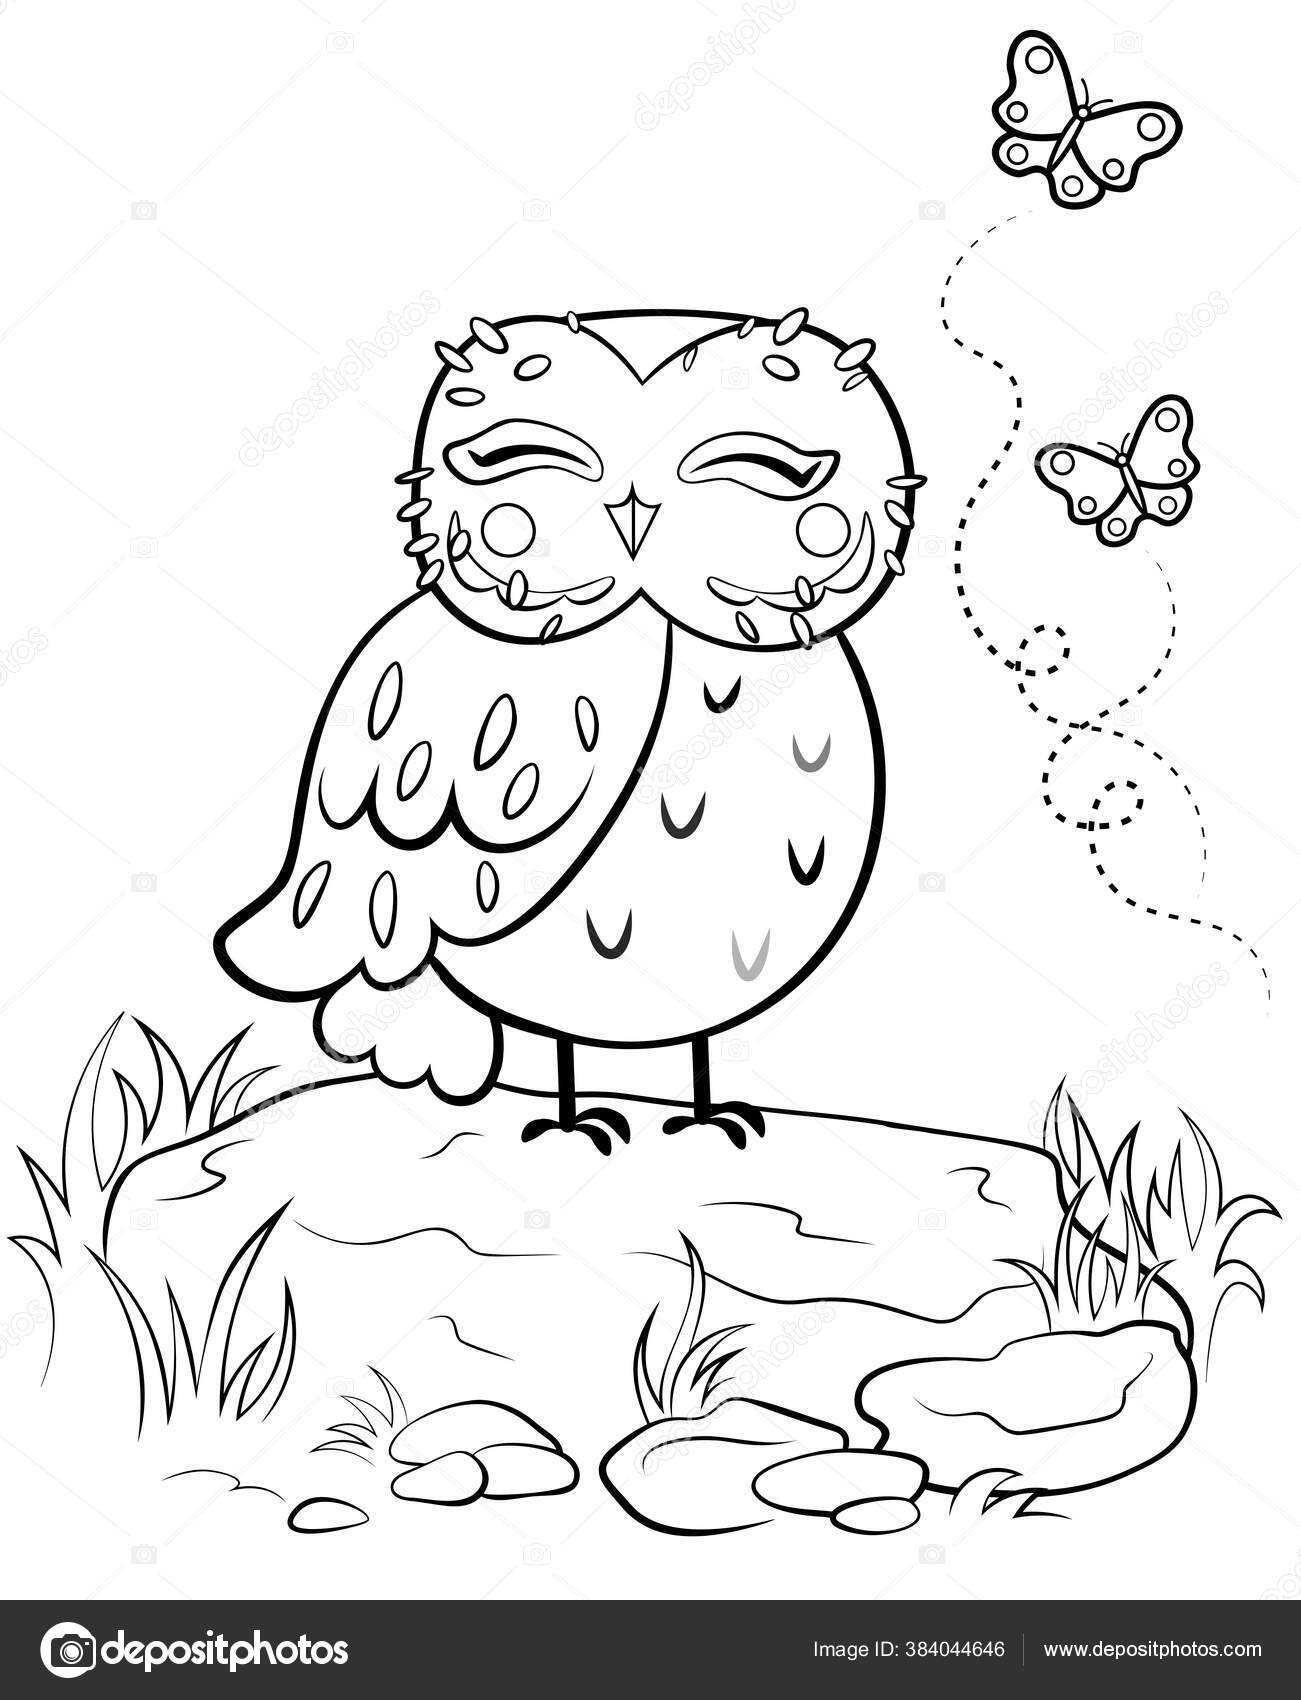 Printable coloring page outline cute cartoon owl stone butterflies vector stock vector by elenaparshina